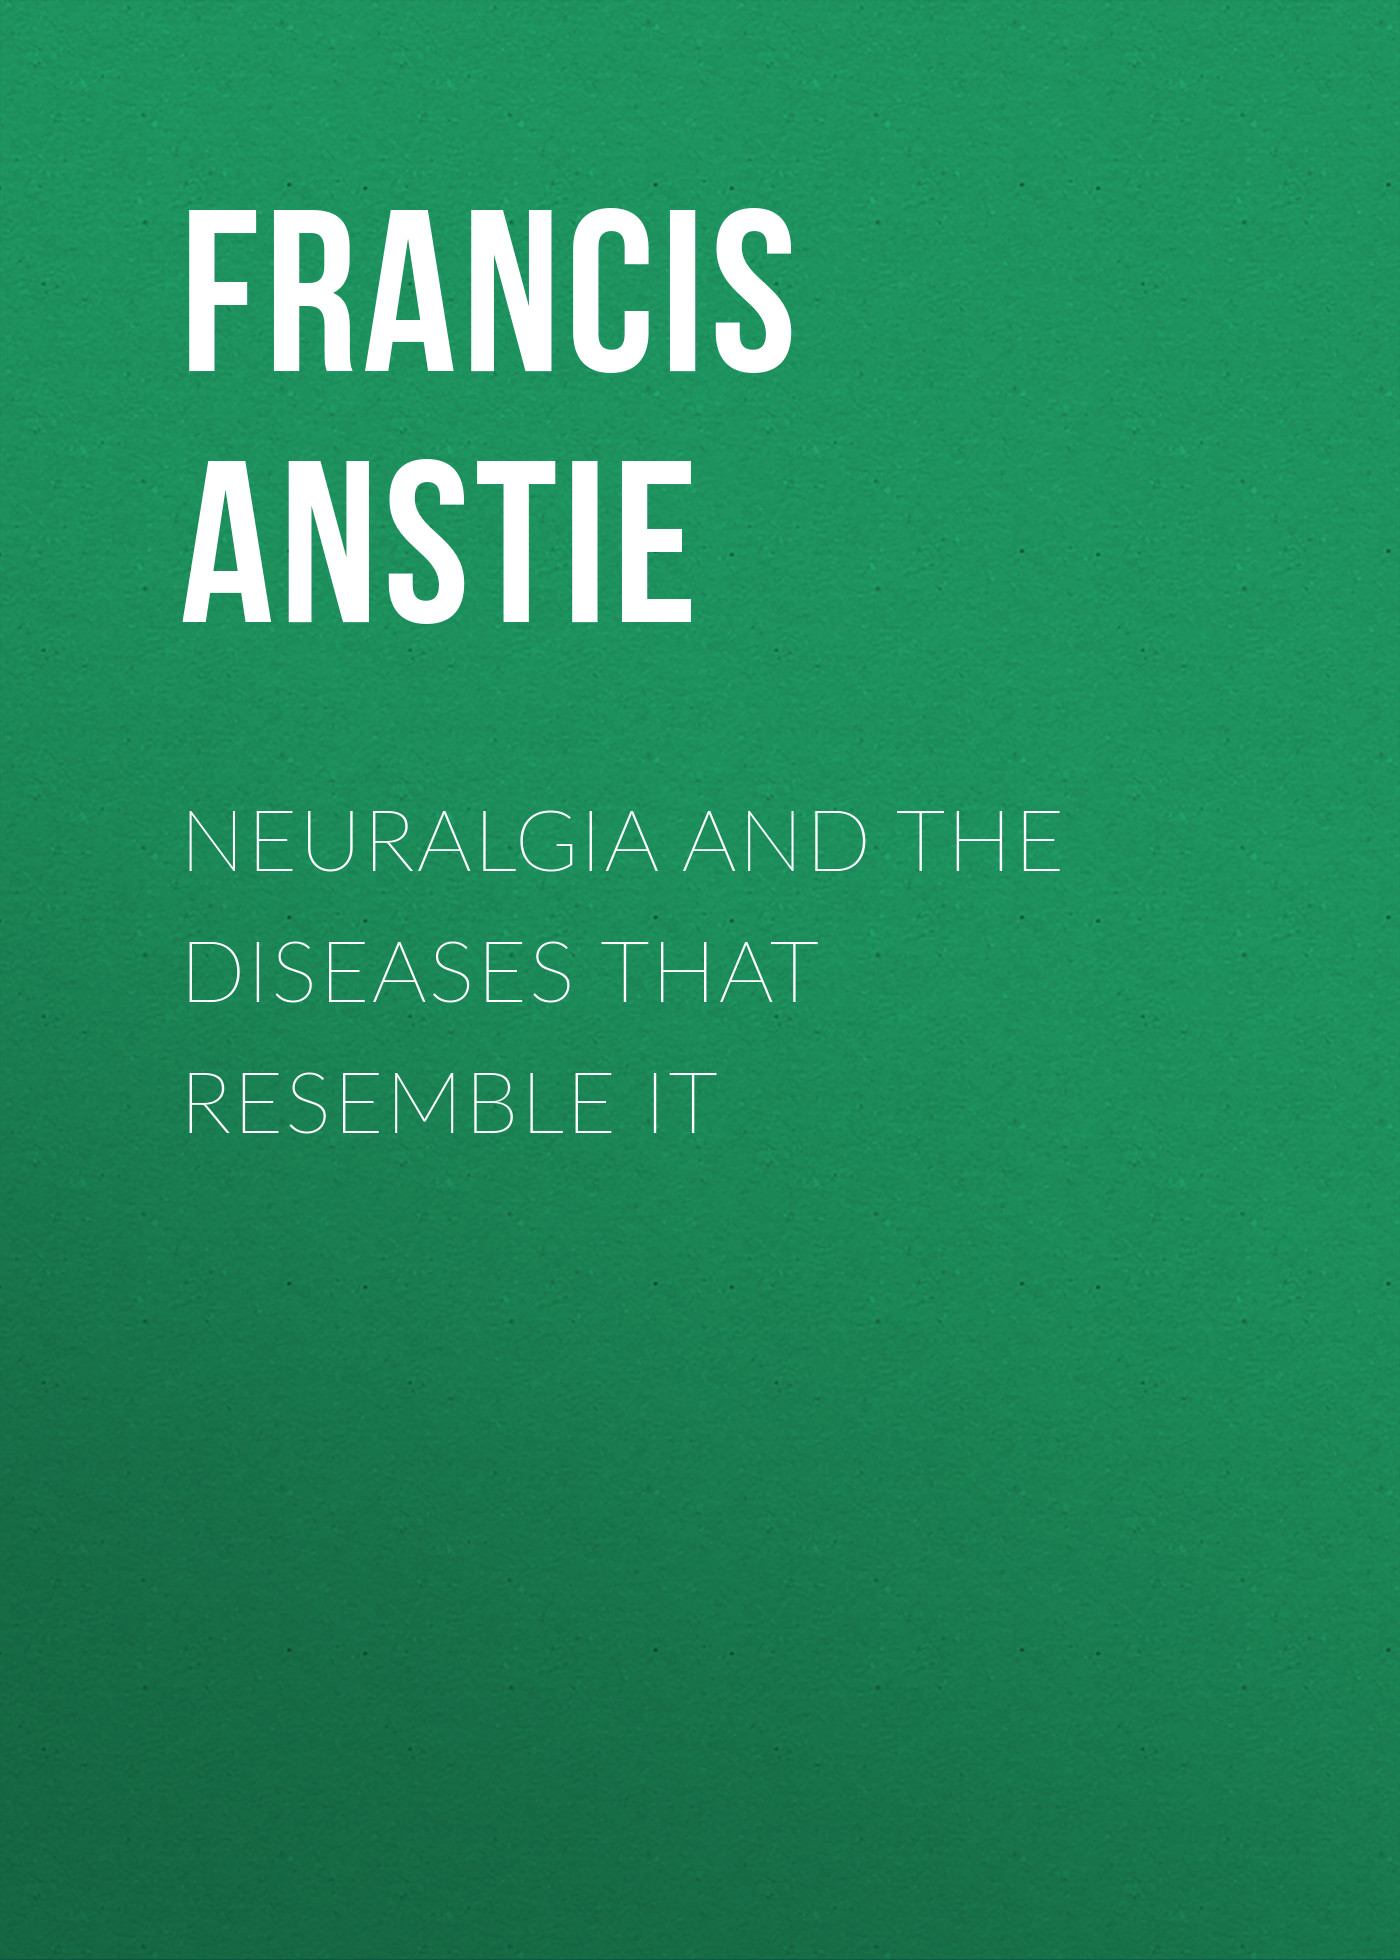 Neuralgia and the Diseases that Resemble it